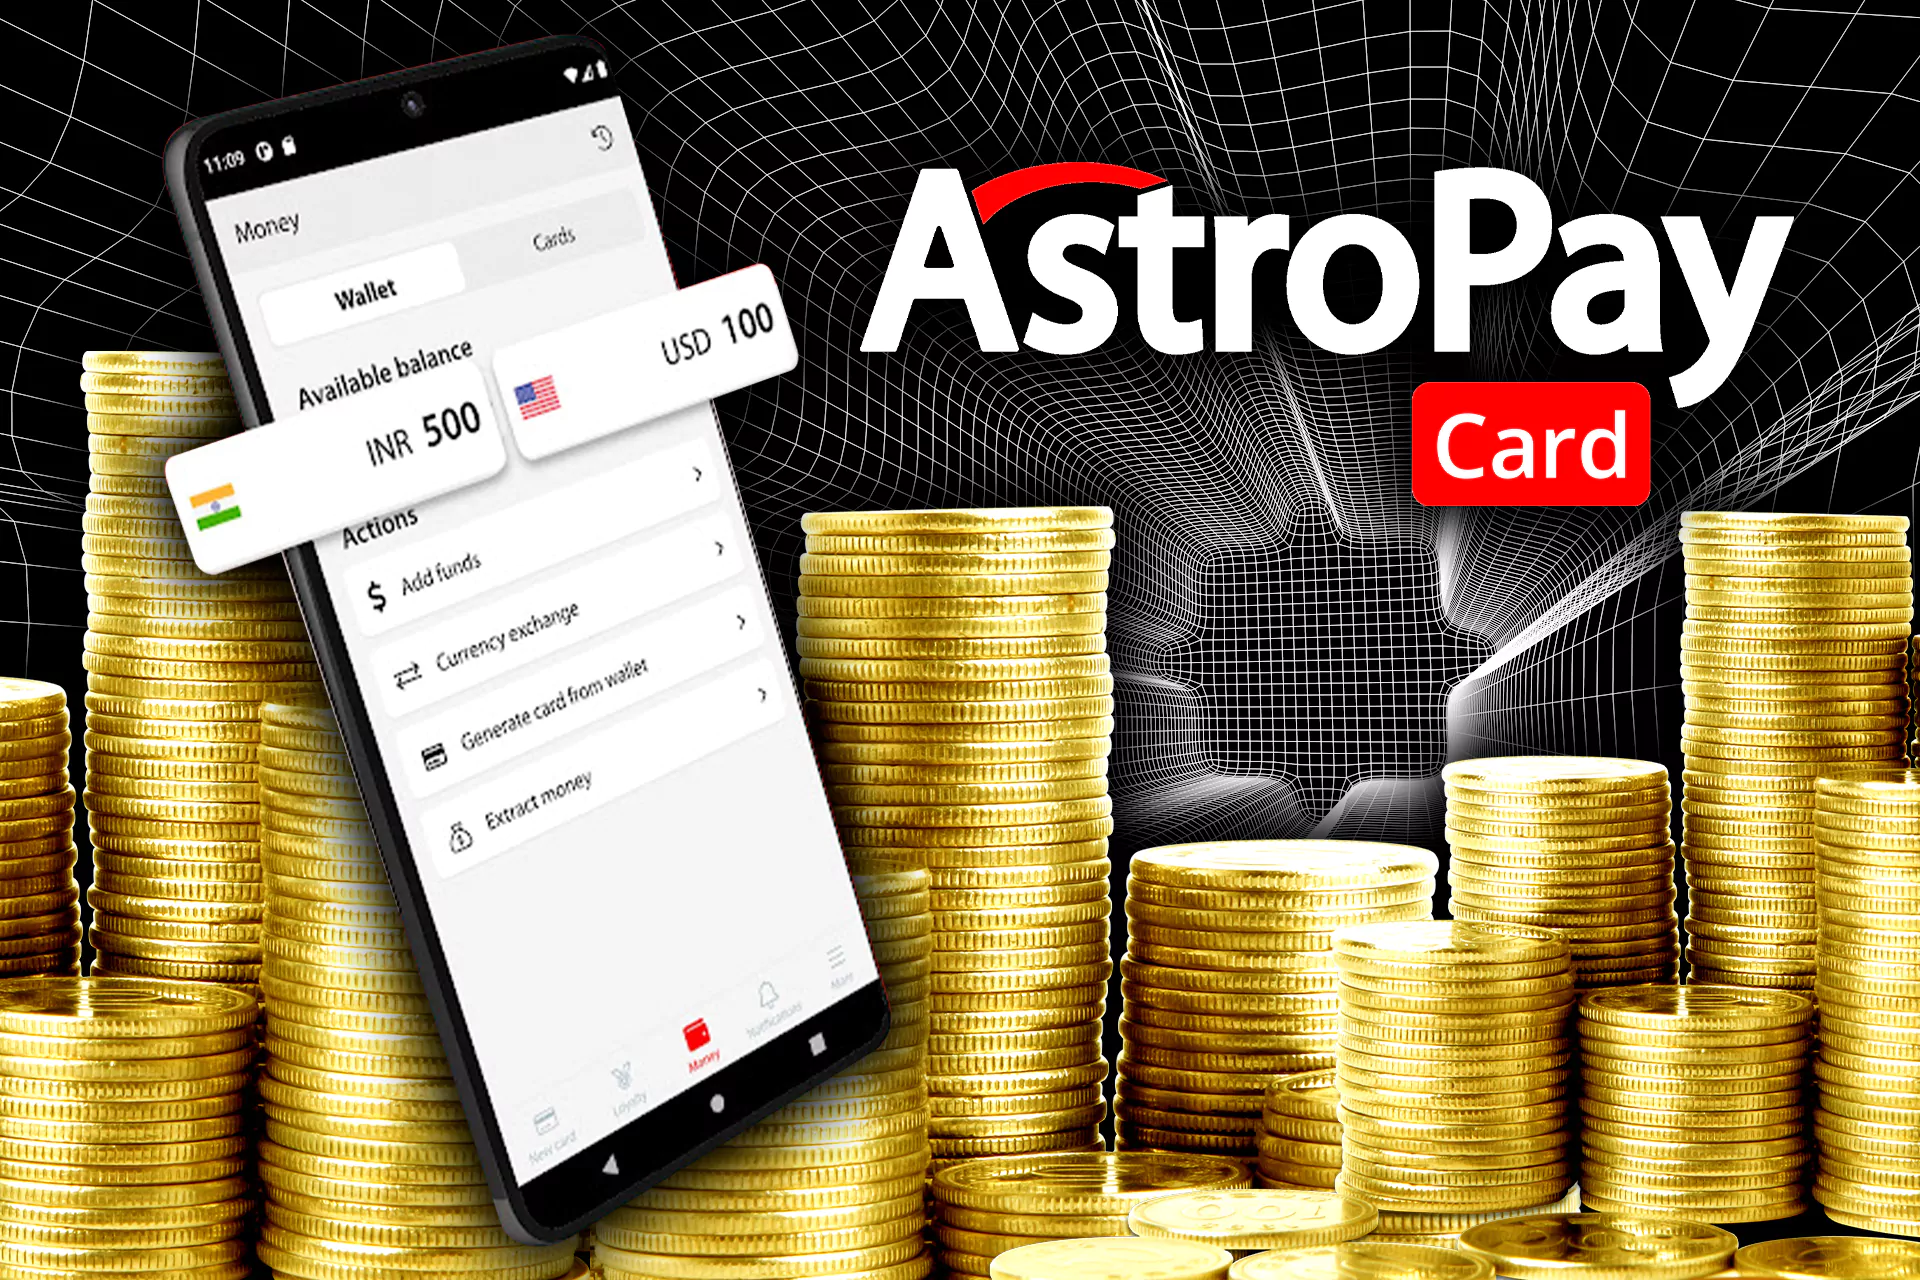 Astropay is a card for international payments.